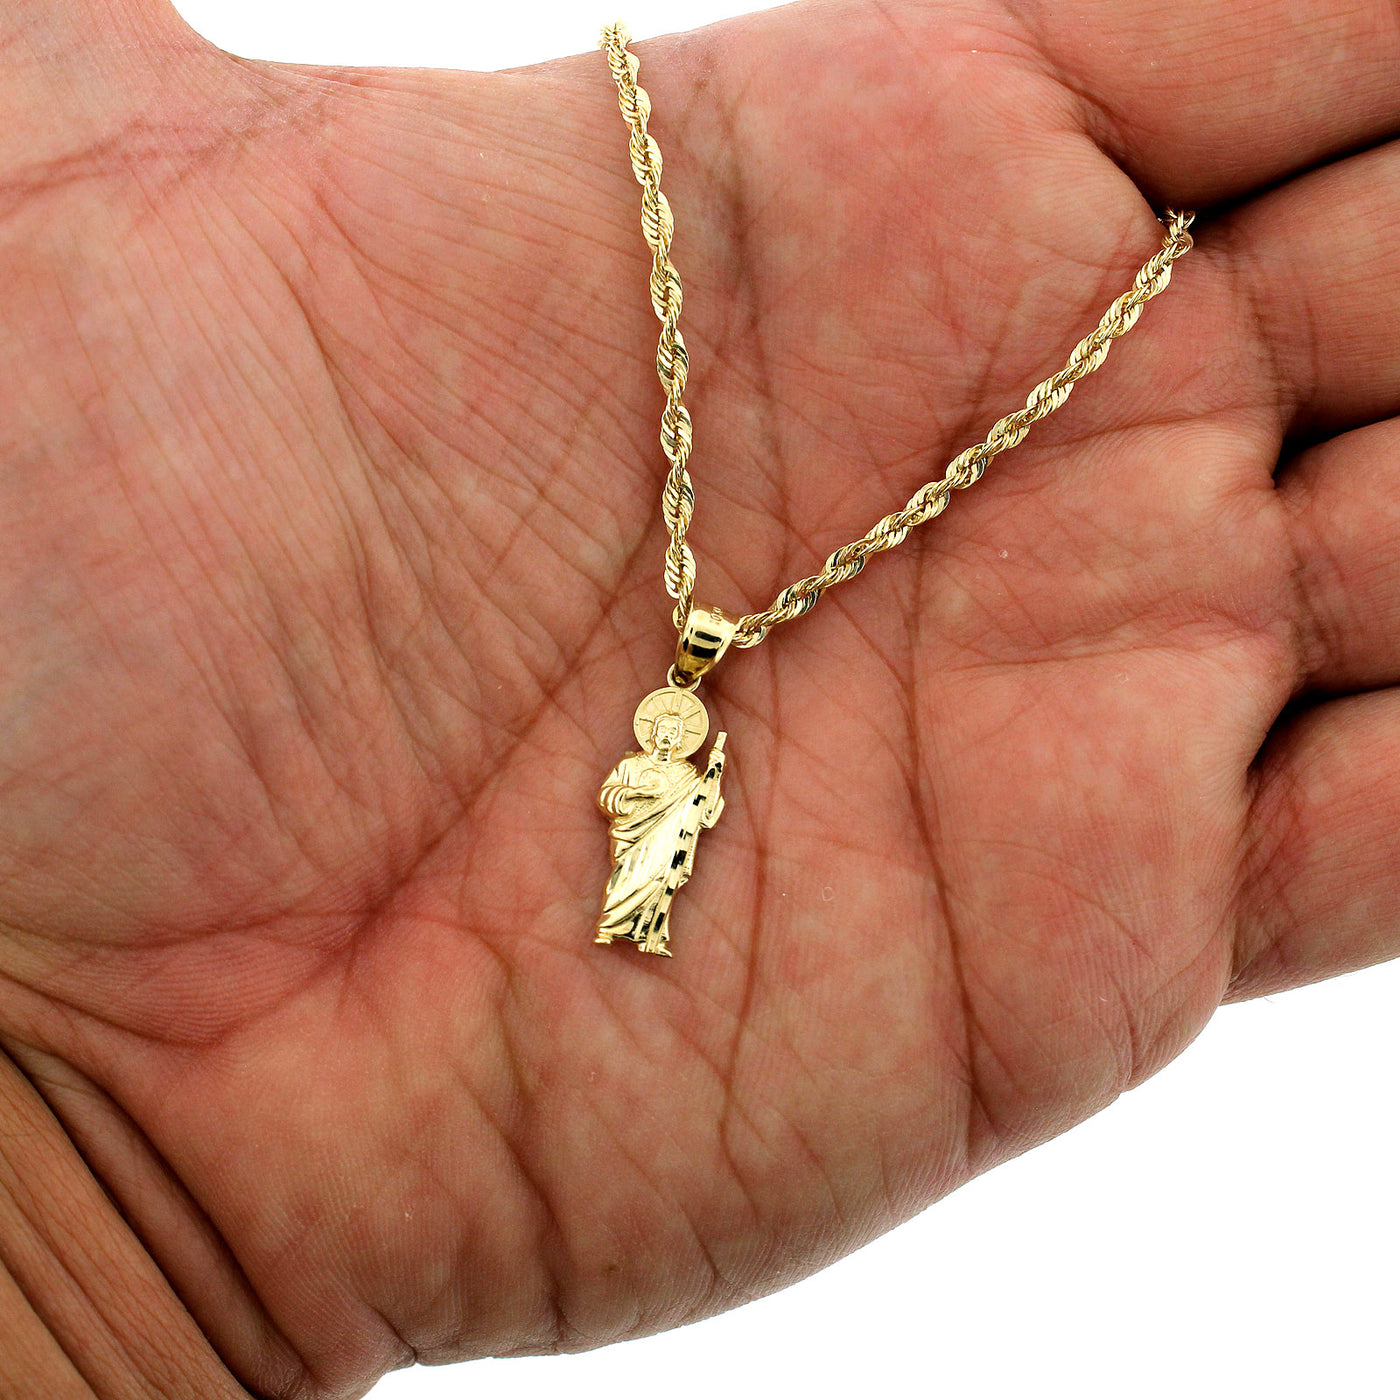 Mens 10K Yellow Gold Saint Jude San Judas Pendant With 2mm Rope Chain Necklace Set